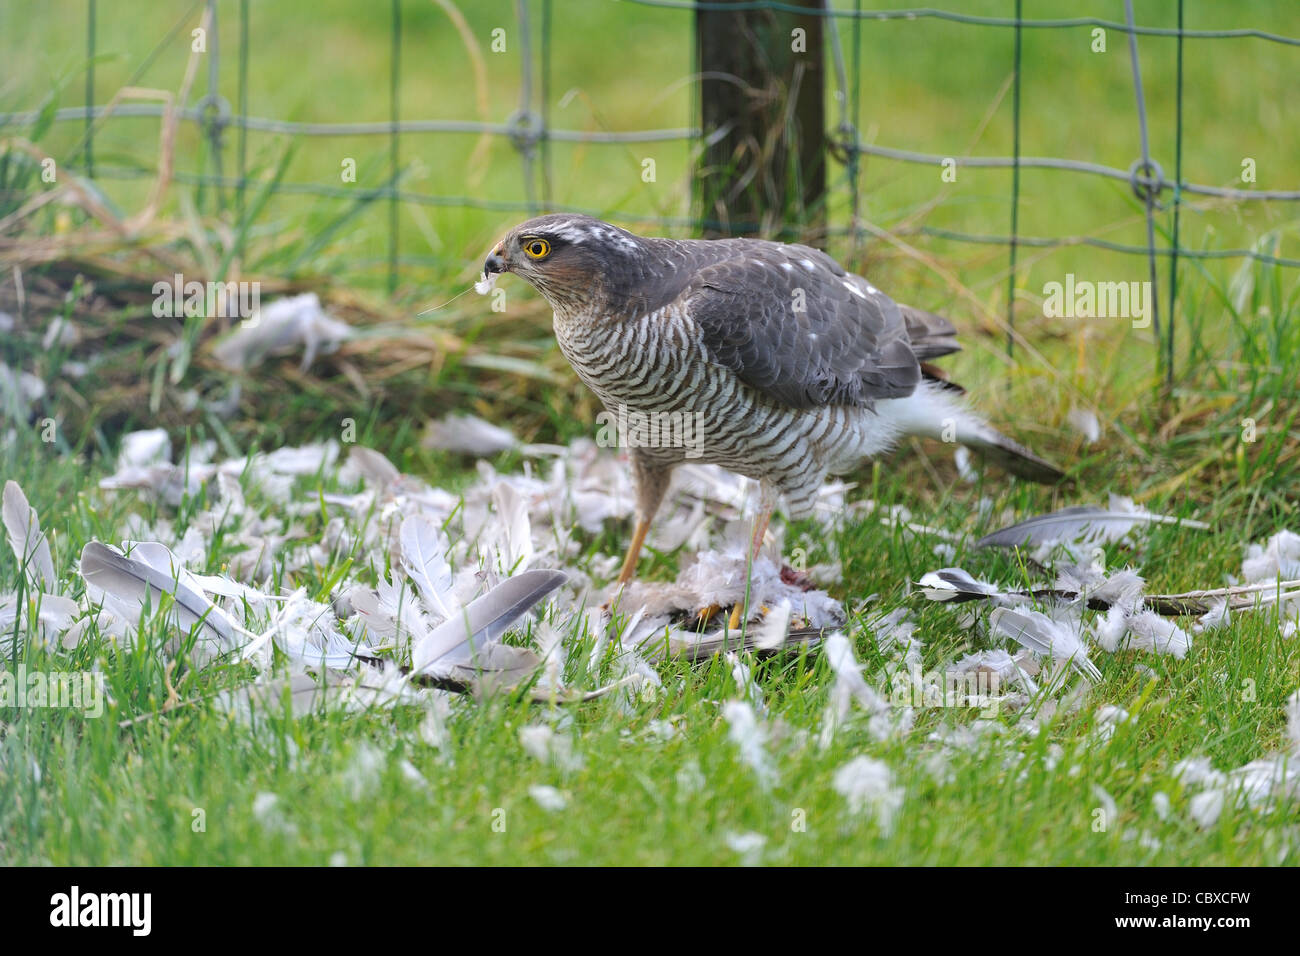 Common sparrow hawk (Accipiter nisus) female plucking a Common Wood pigeon (Columba palumbus) in a meadow Stock Photo